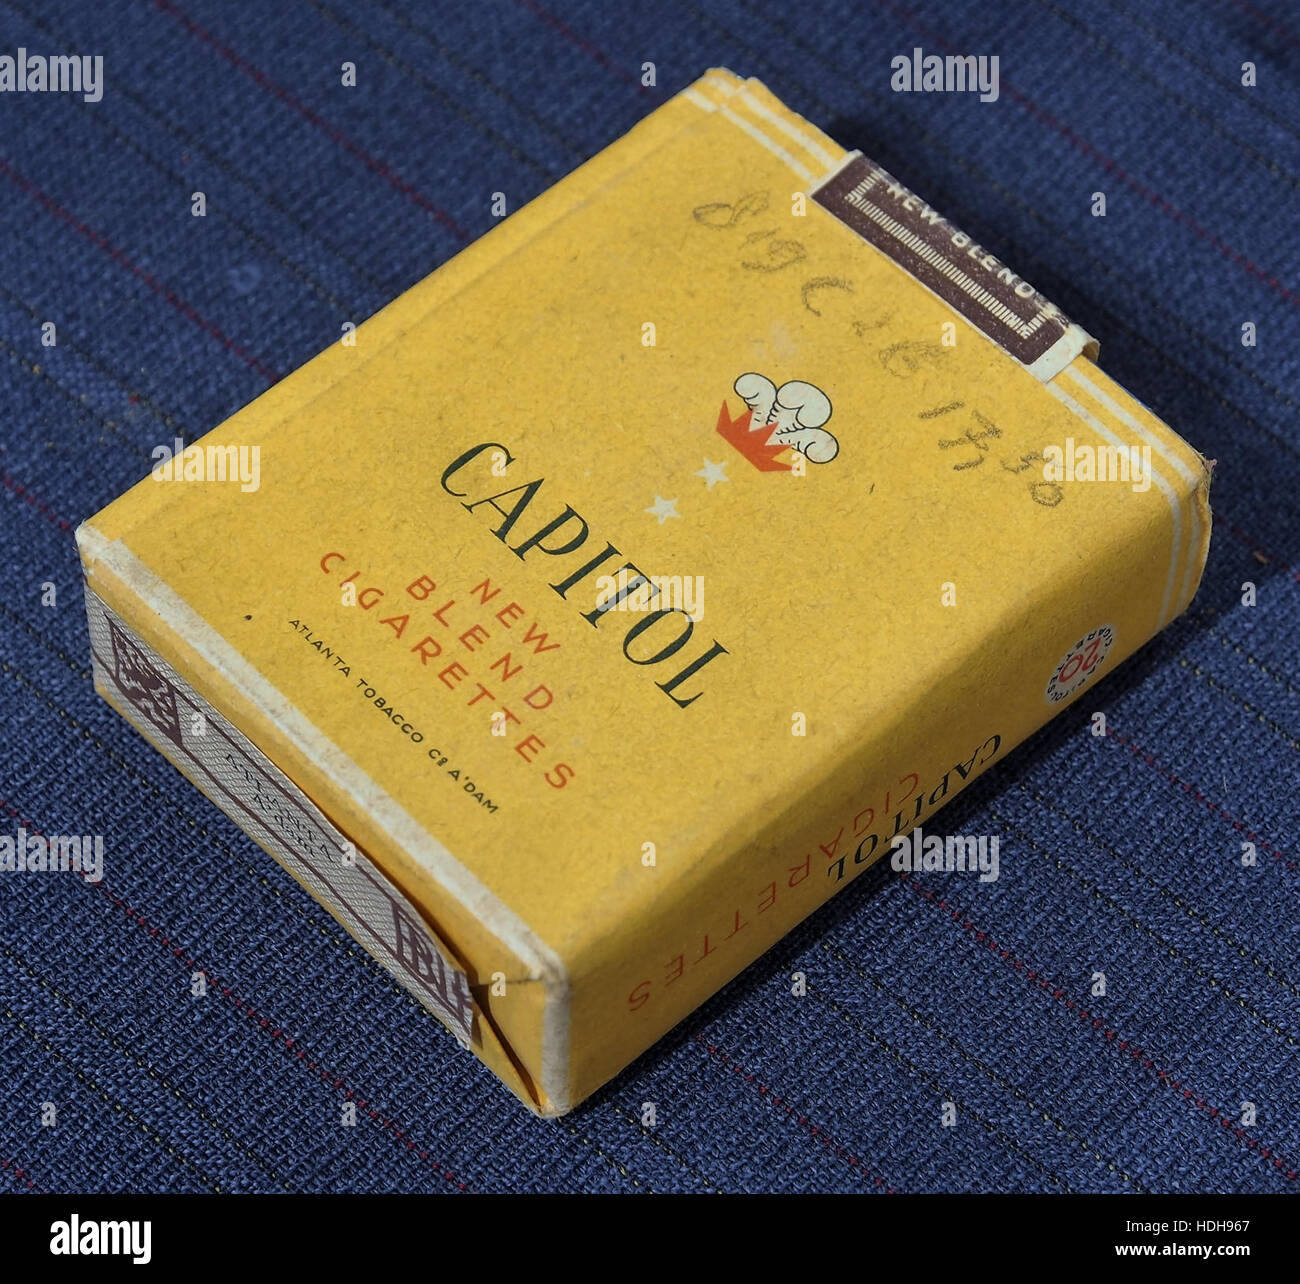 Capitol cigarettes pack pic2 Stock Photo